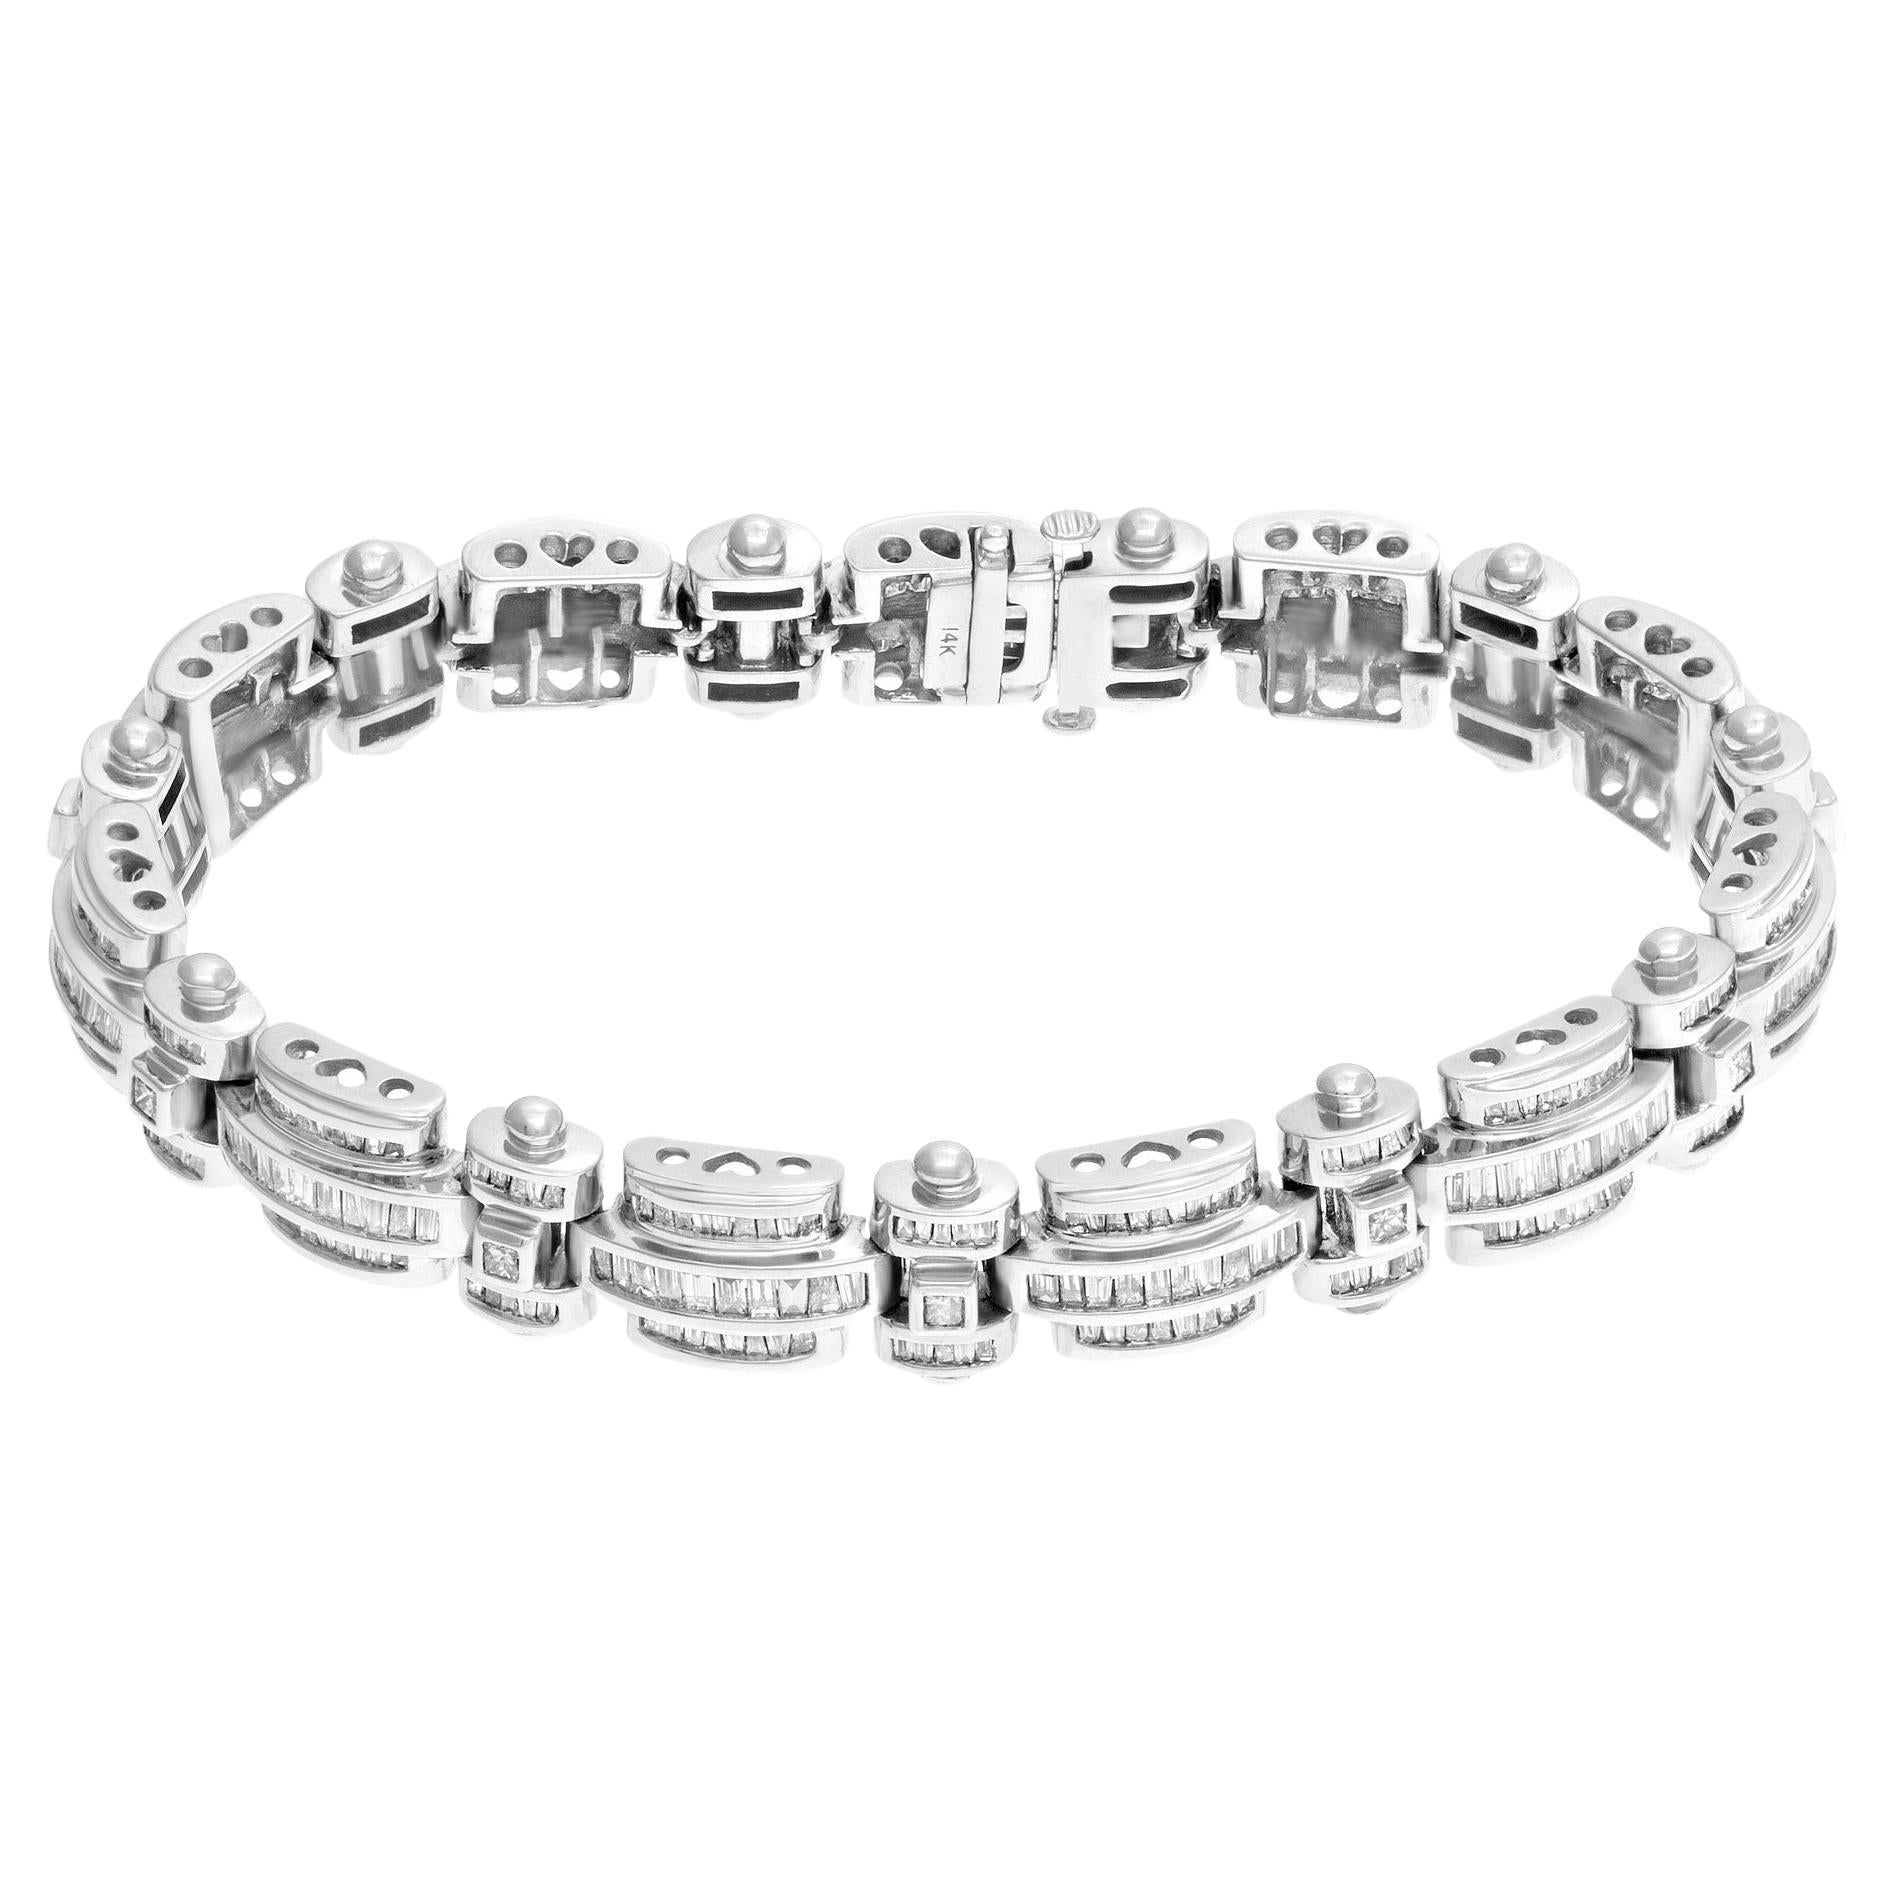 Diamond Link Bracelet in 14k White Gold with Approximately 8.0 Carat in Baguette